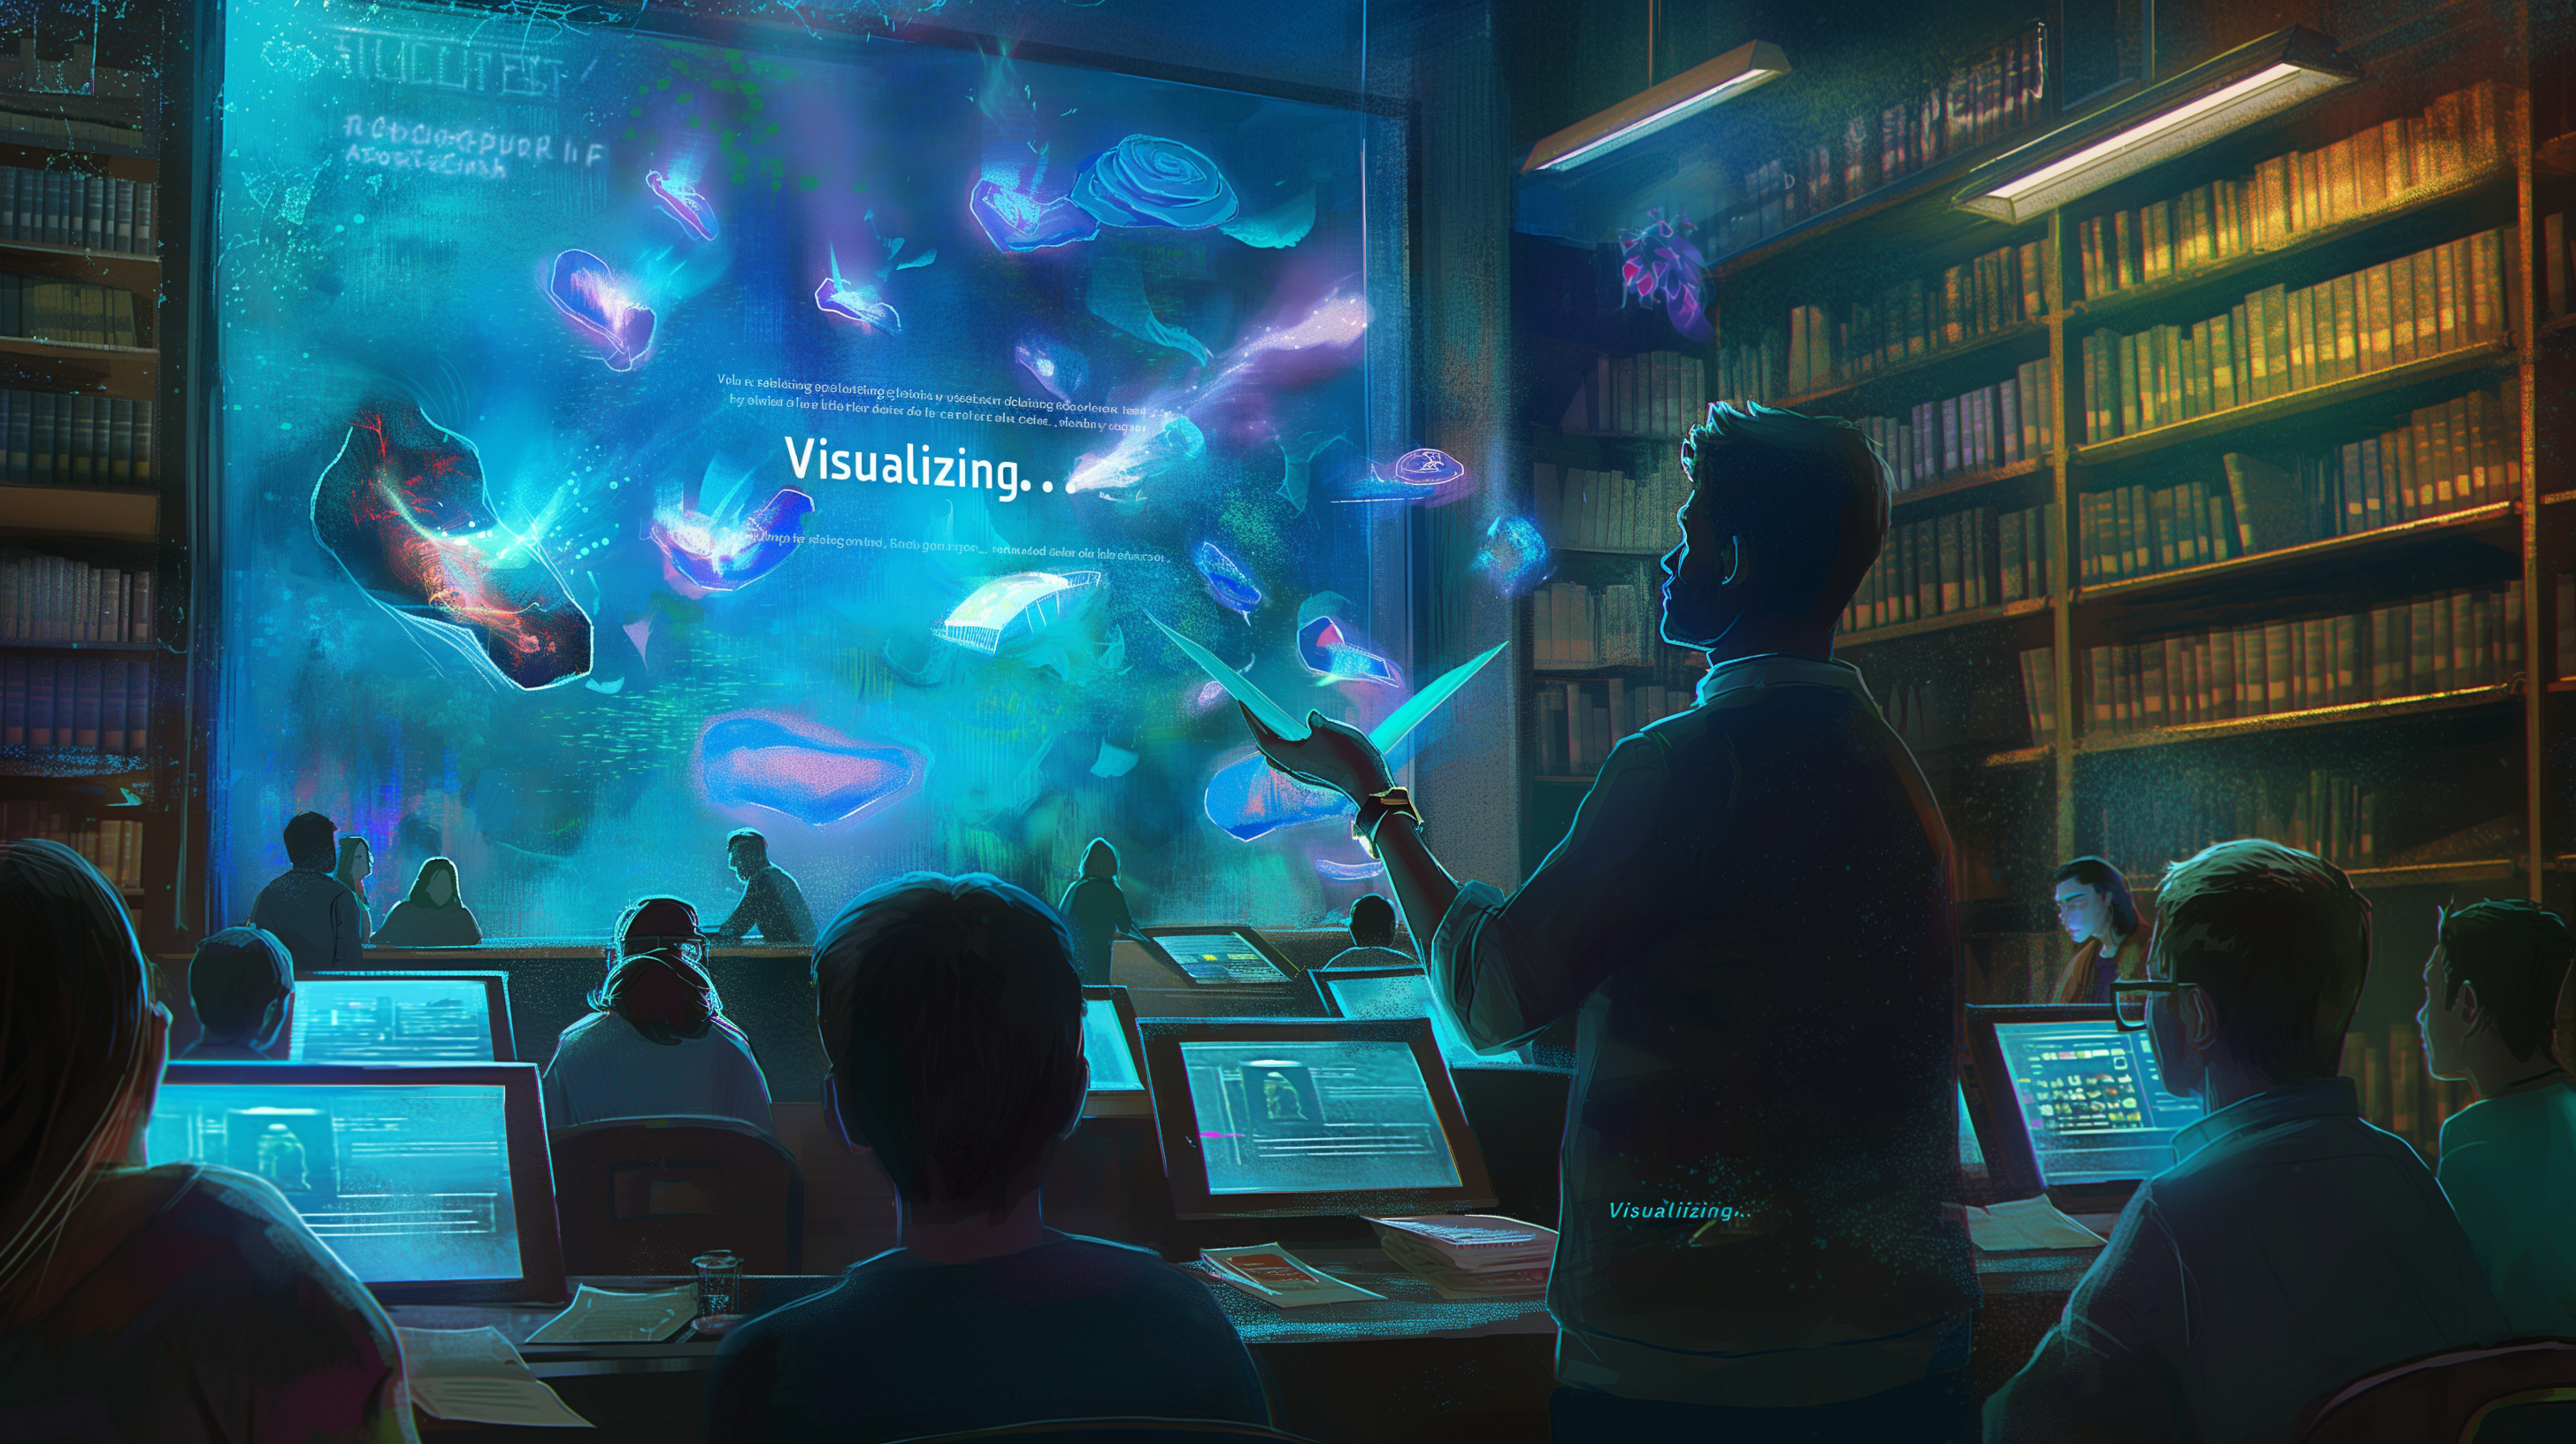 A teacher using AI technology to create visualizations in a classroom, with images and data dynamically projected on a large screen. Students at their desks interact with the visualizations on their monitors, while the classroom setting includes bookshelves filled with books, highlighting a blend of traditional and modern educational tools.